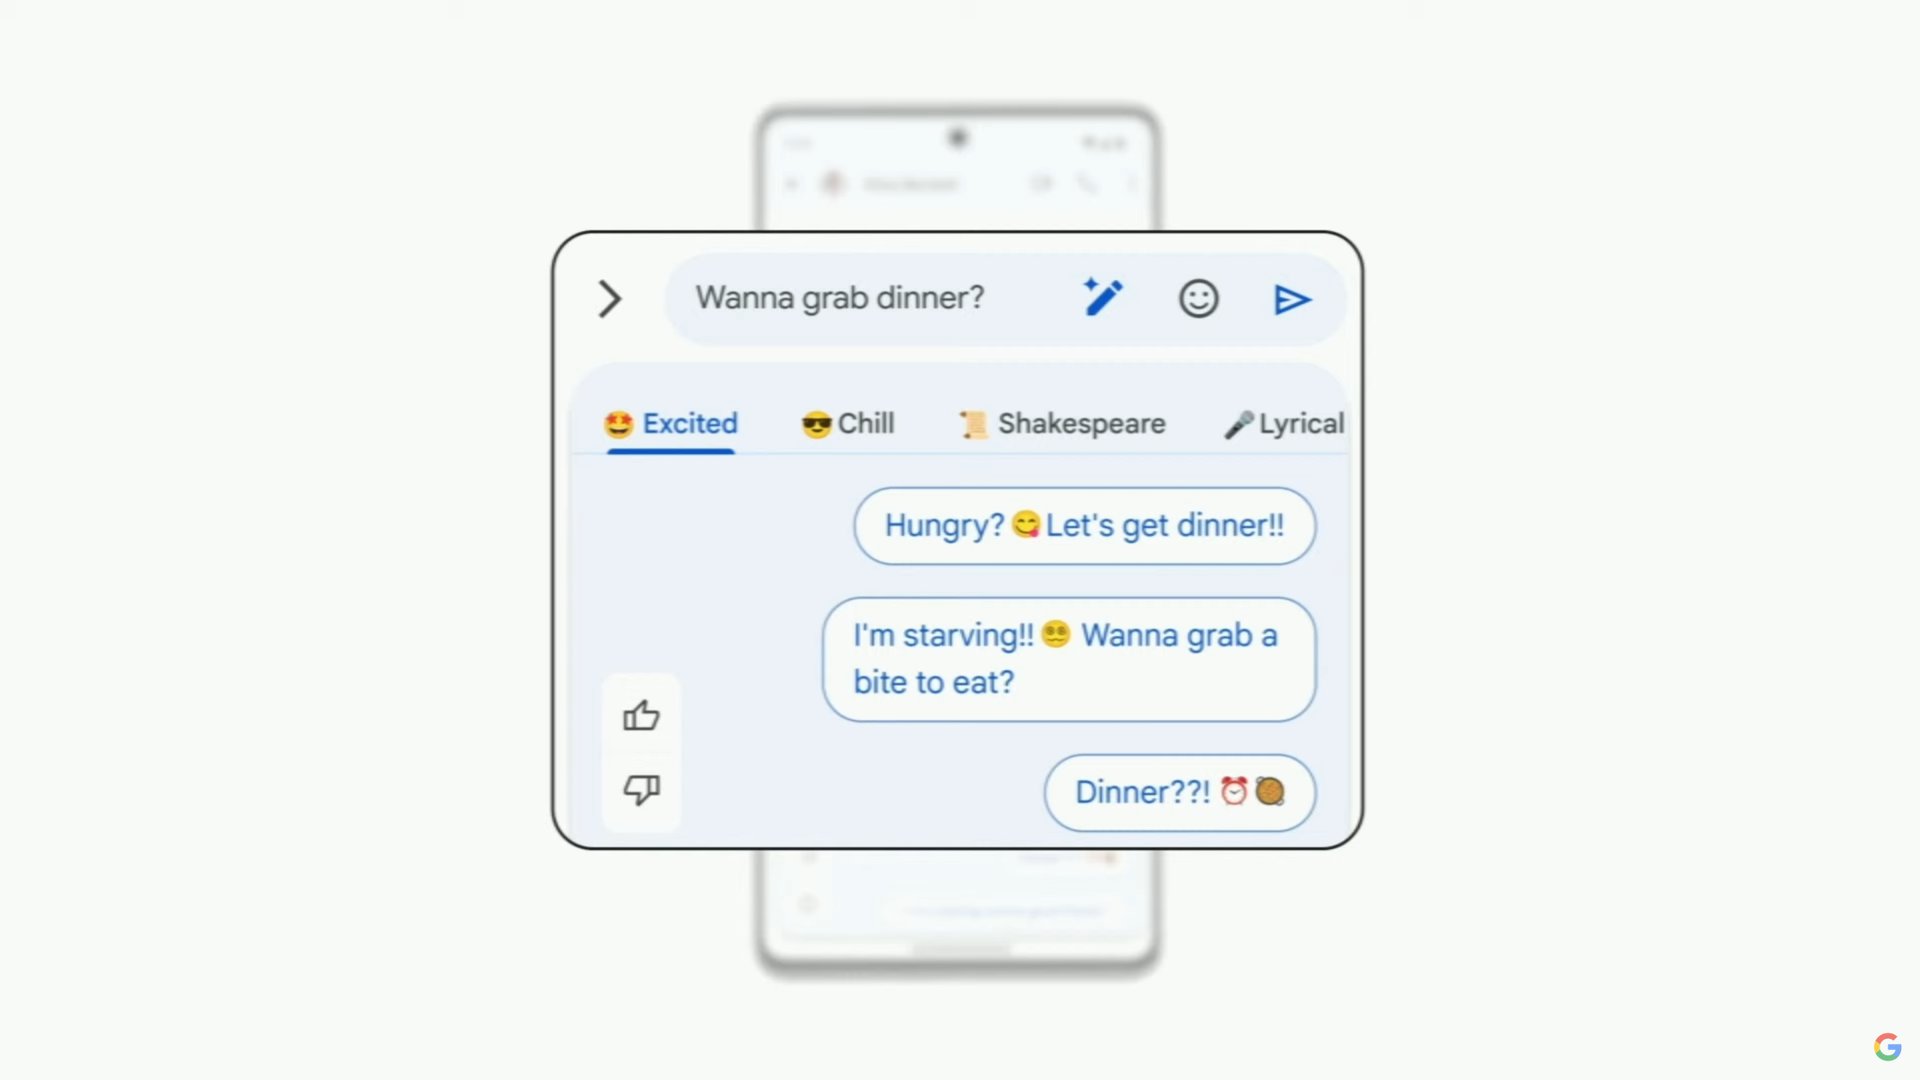 Google’s Magic Compose is available now, bringing generative AI to Messages